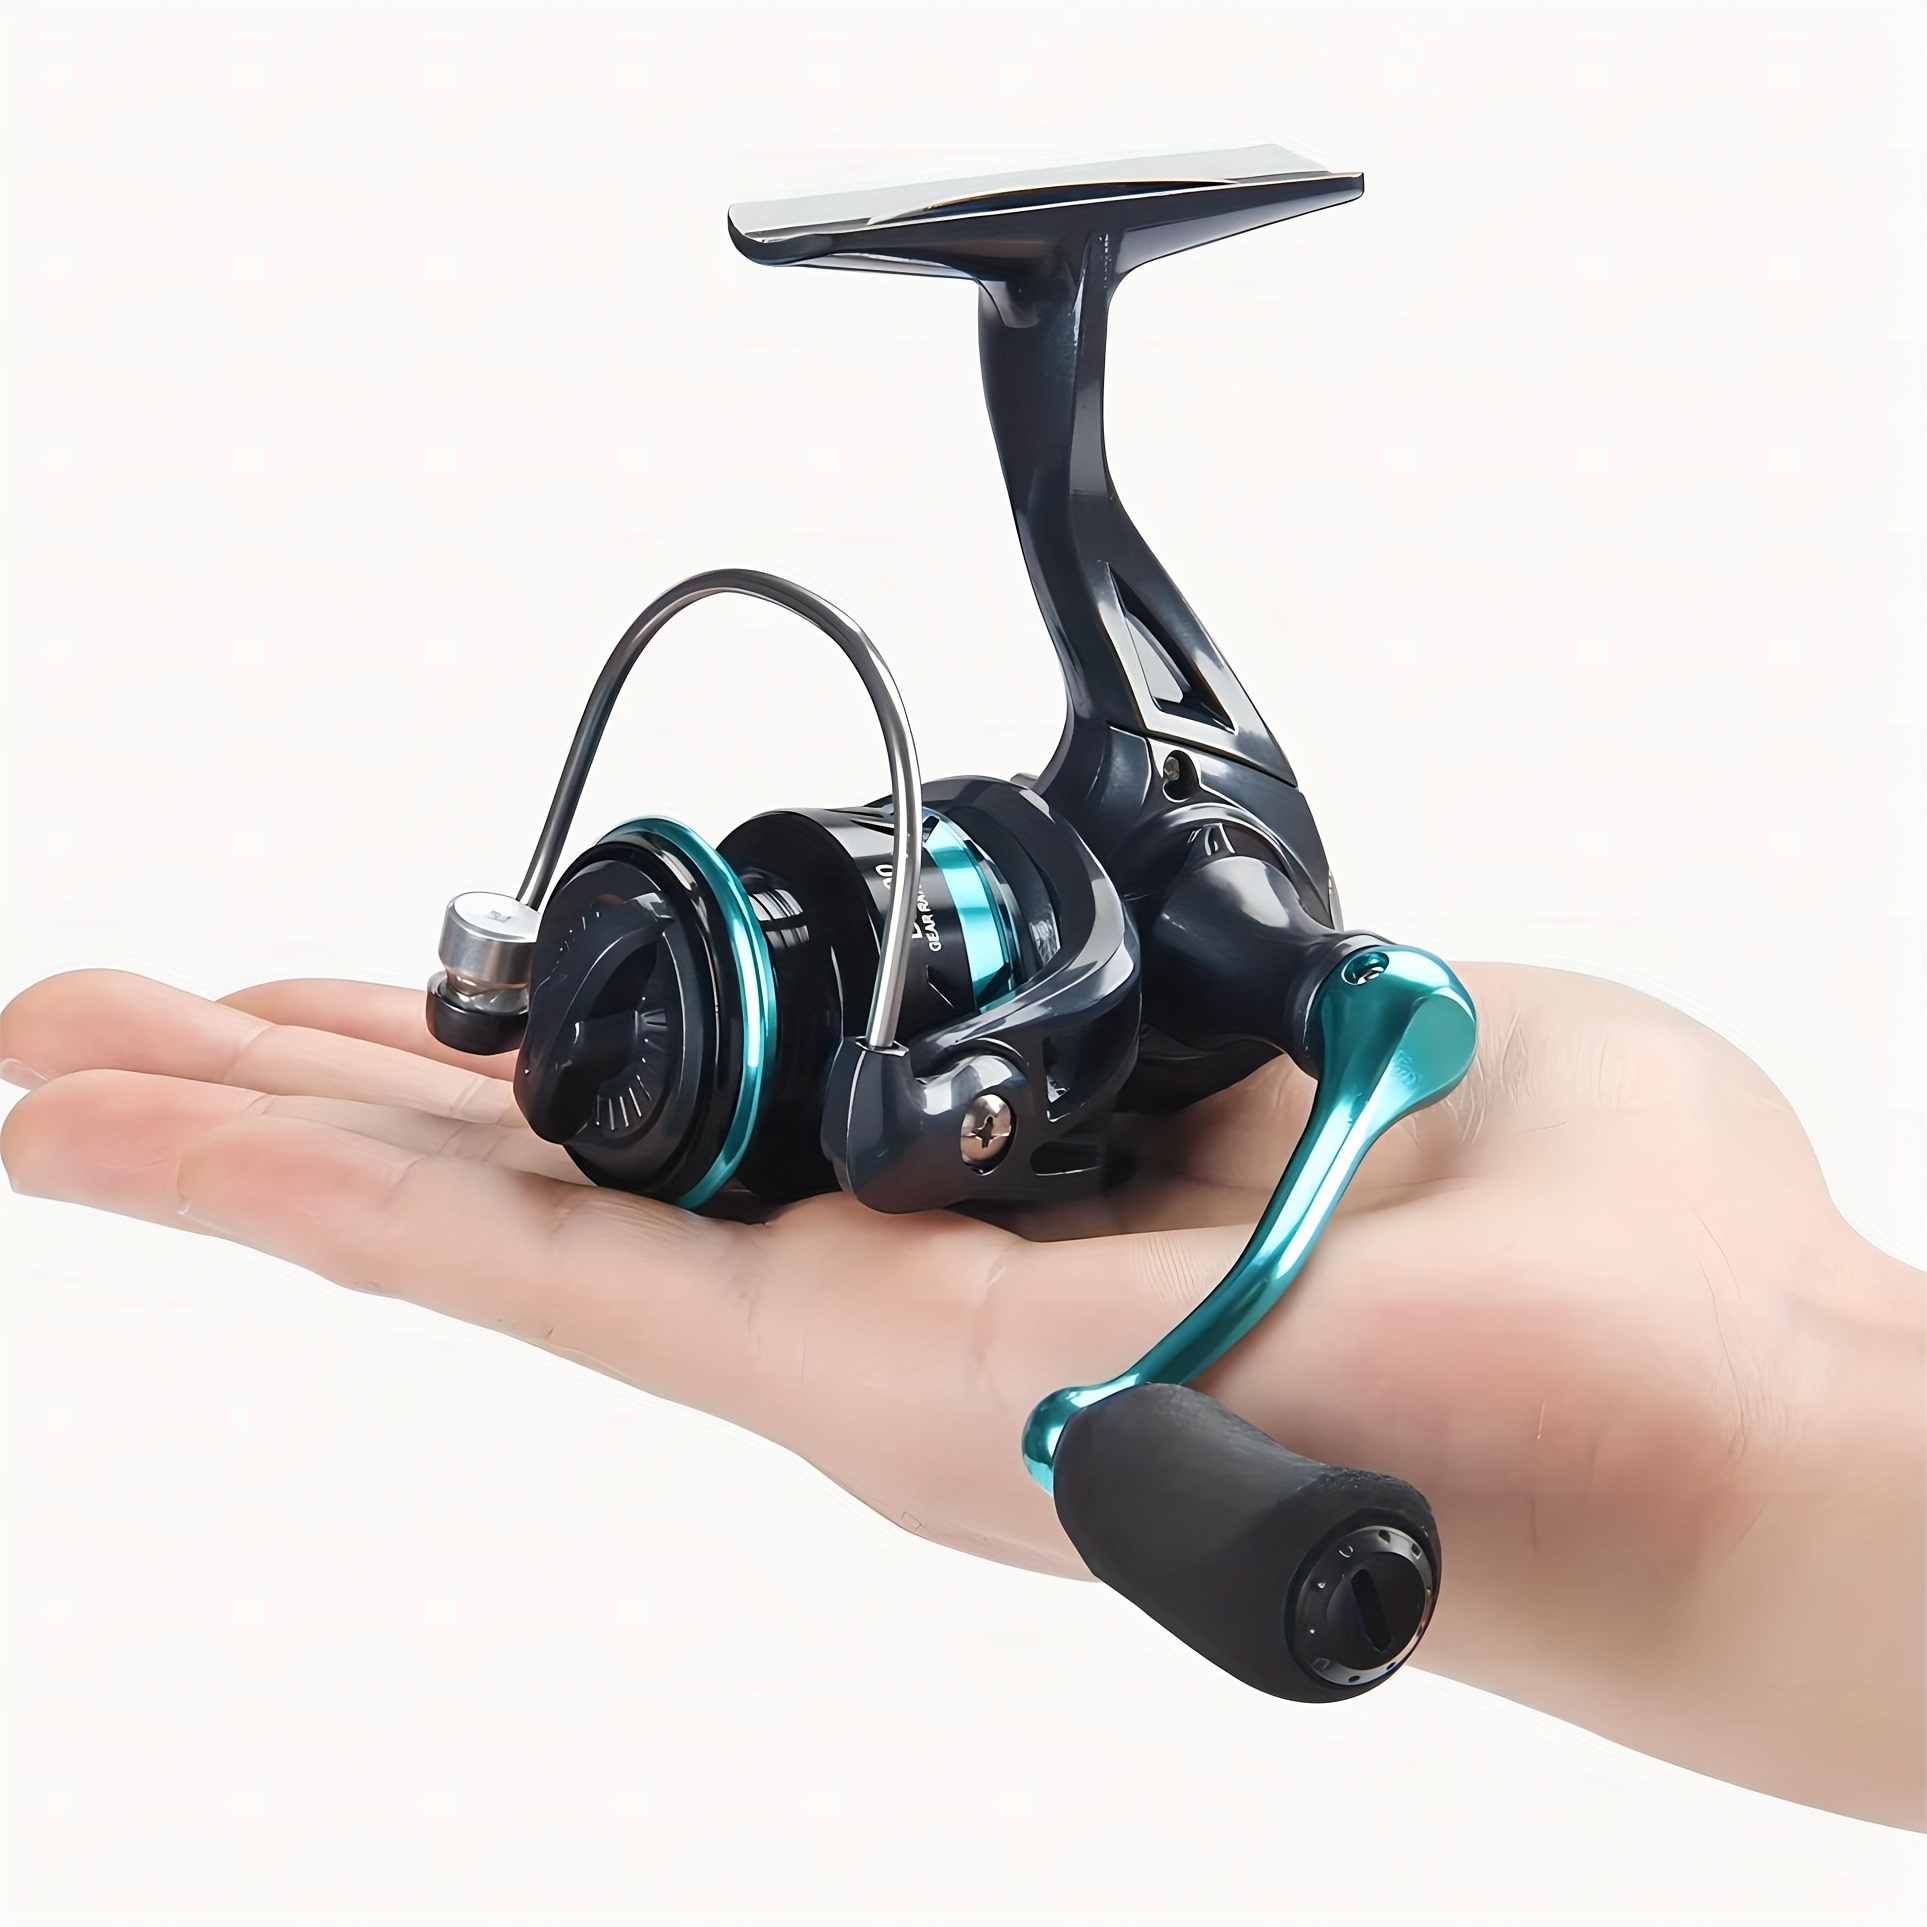 

1pc Dk800 4.8:1 Gear Ratio Spinning Reel For Sea Fishing Rod, Outdoor Fishing Tackle